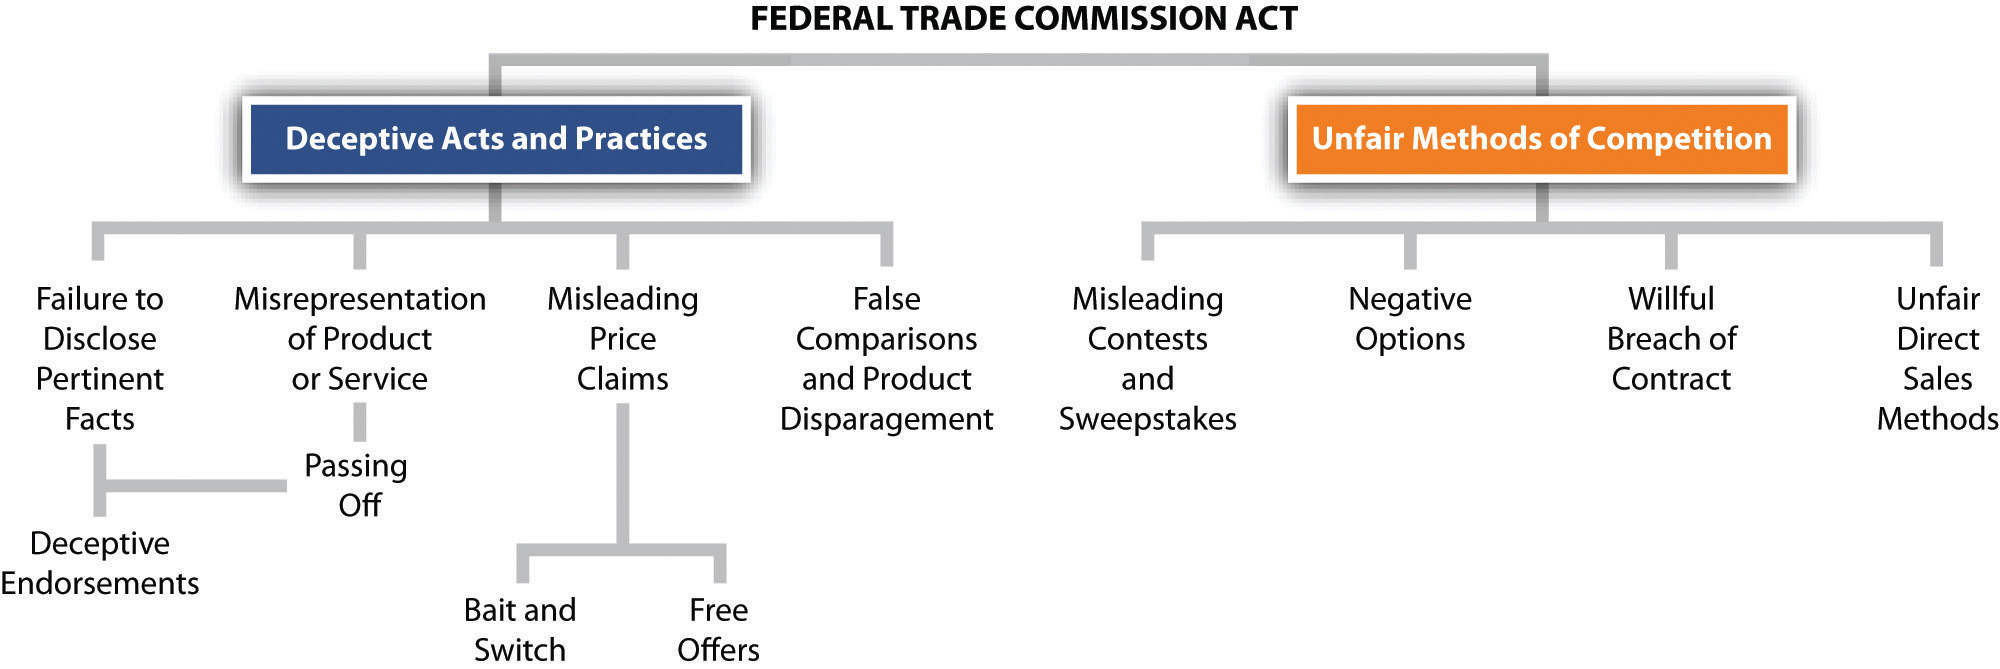 The Federal Trade Commission Powers And Law Governing Deceptive Acts